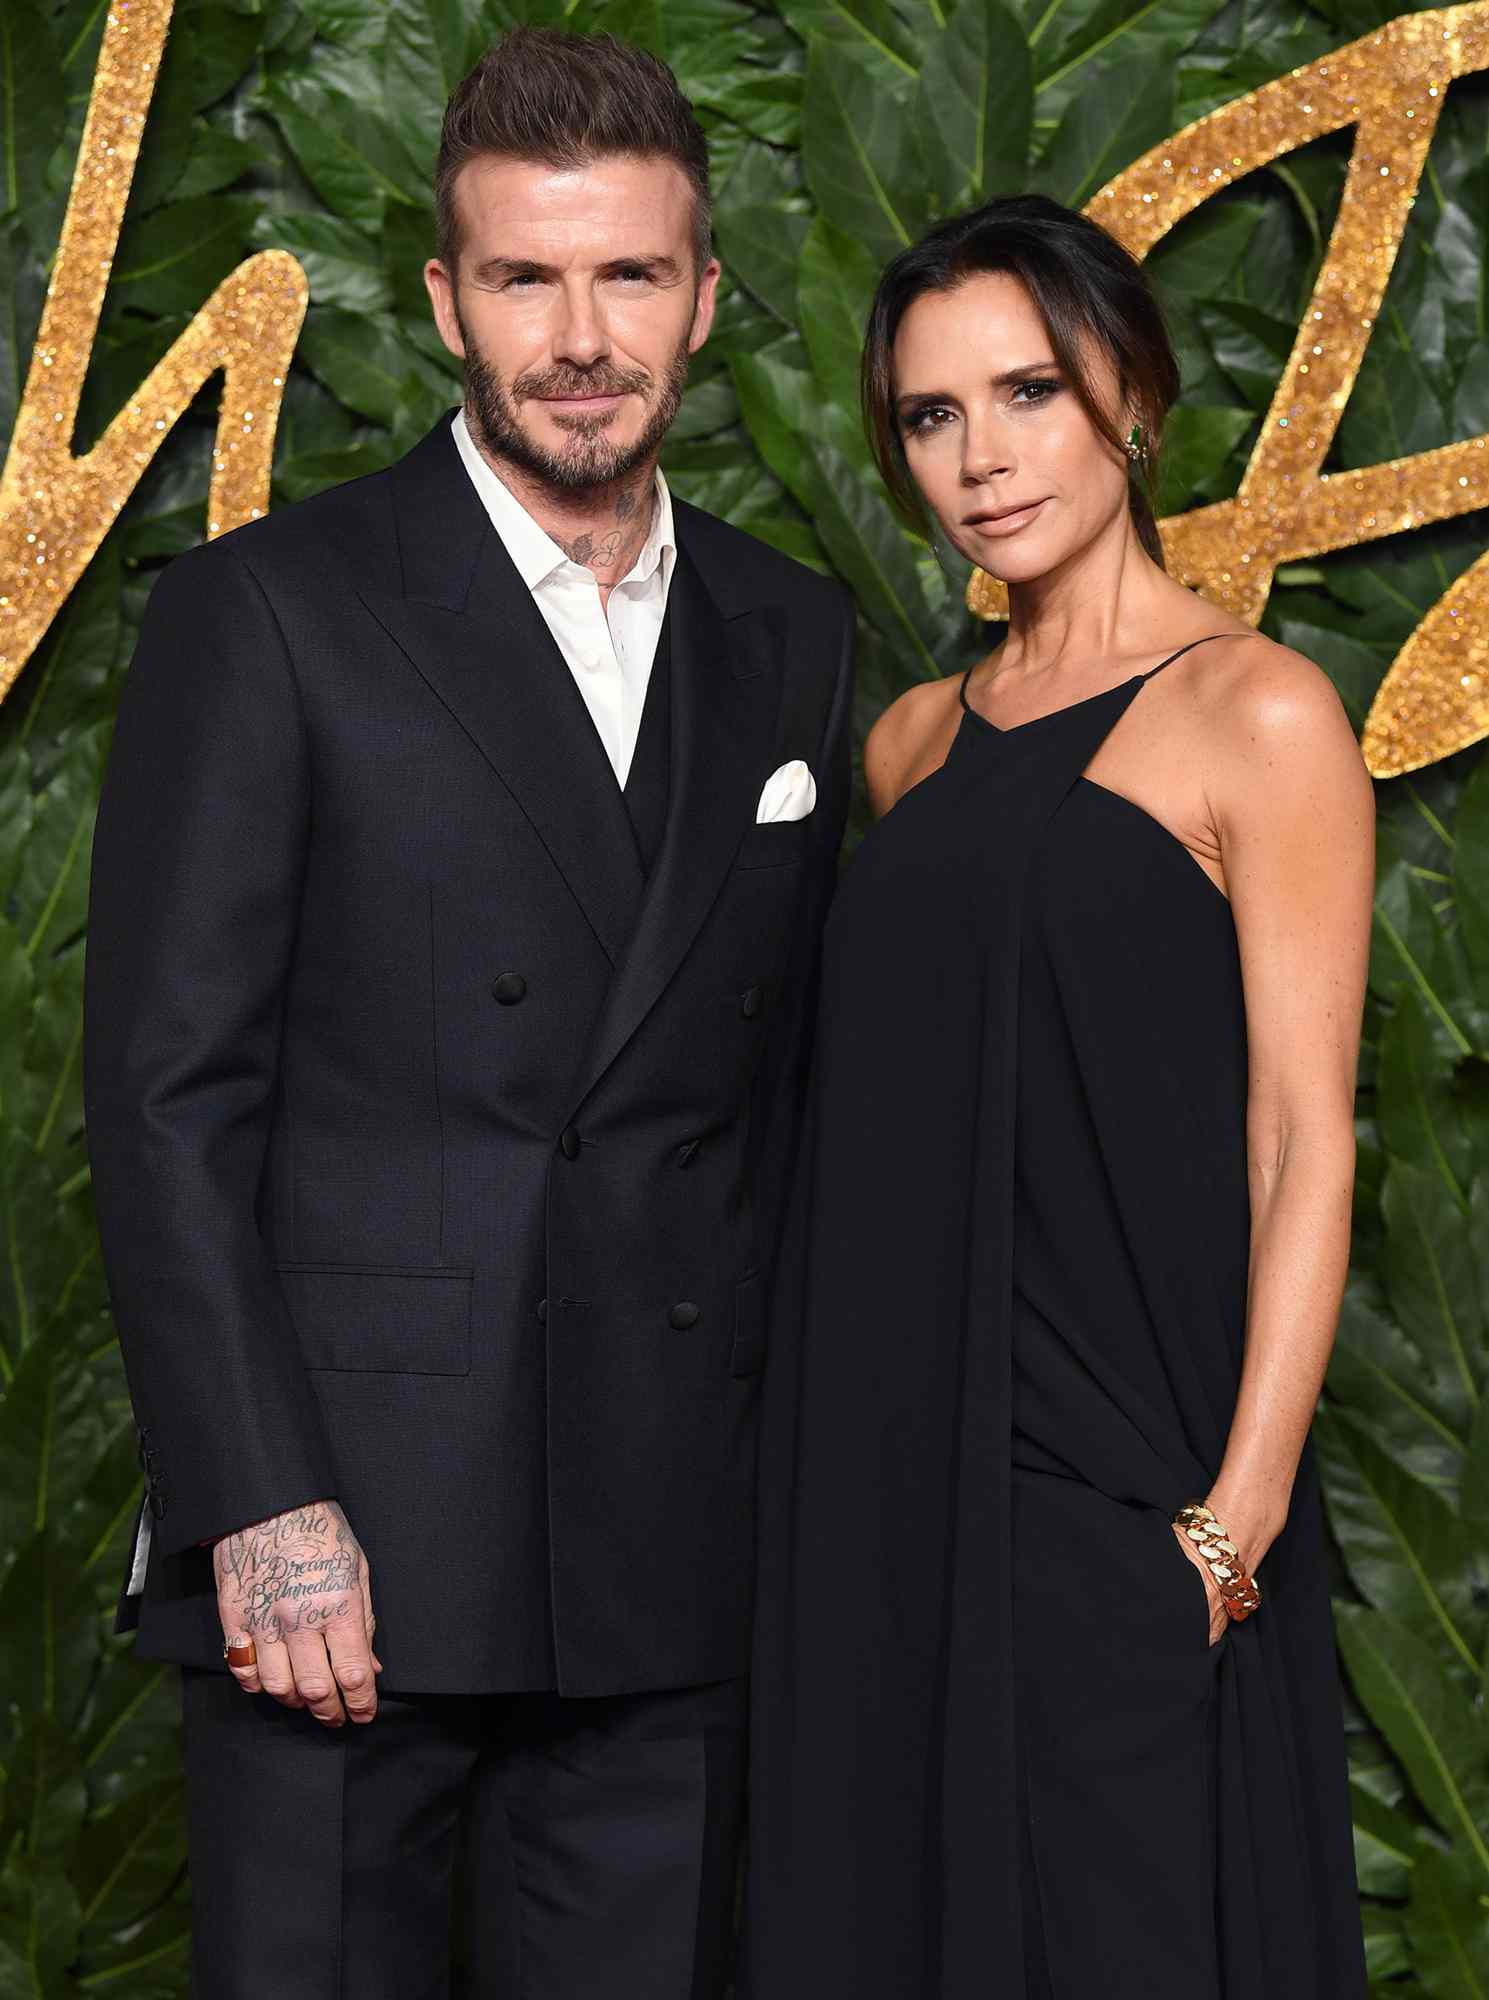 David and Victoria Beckham: A Passionate Love Story That Will Inspire You 17